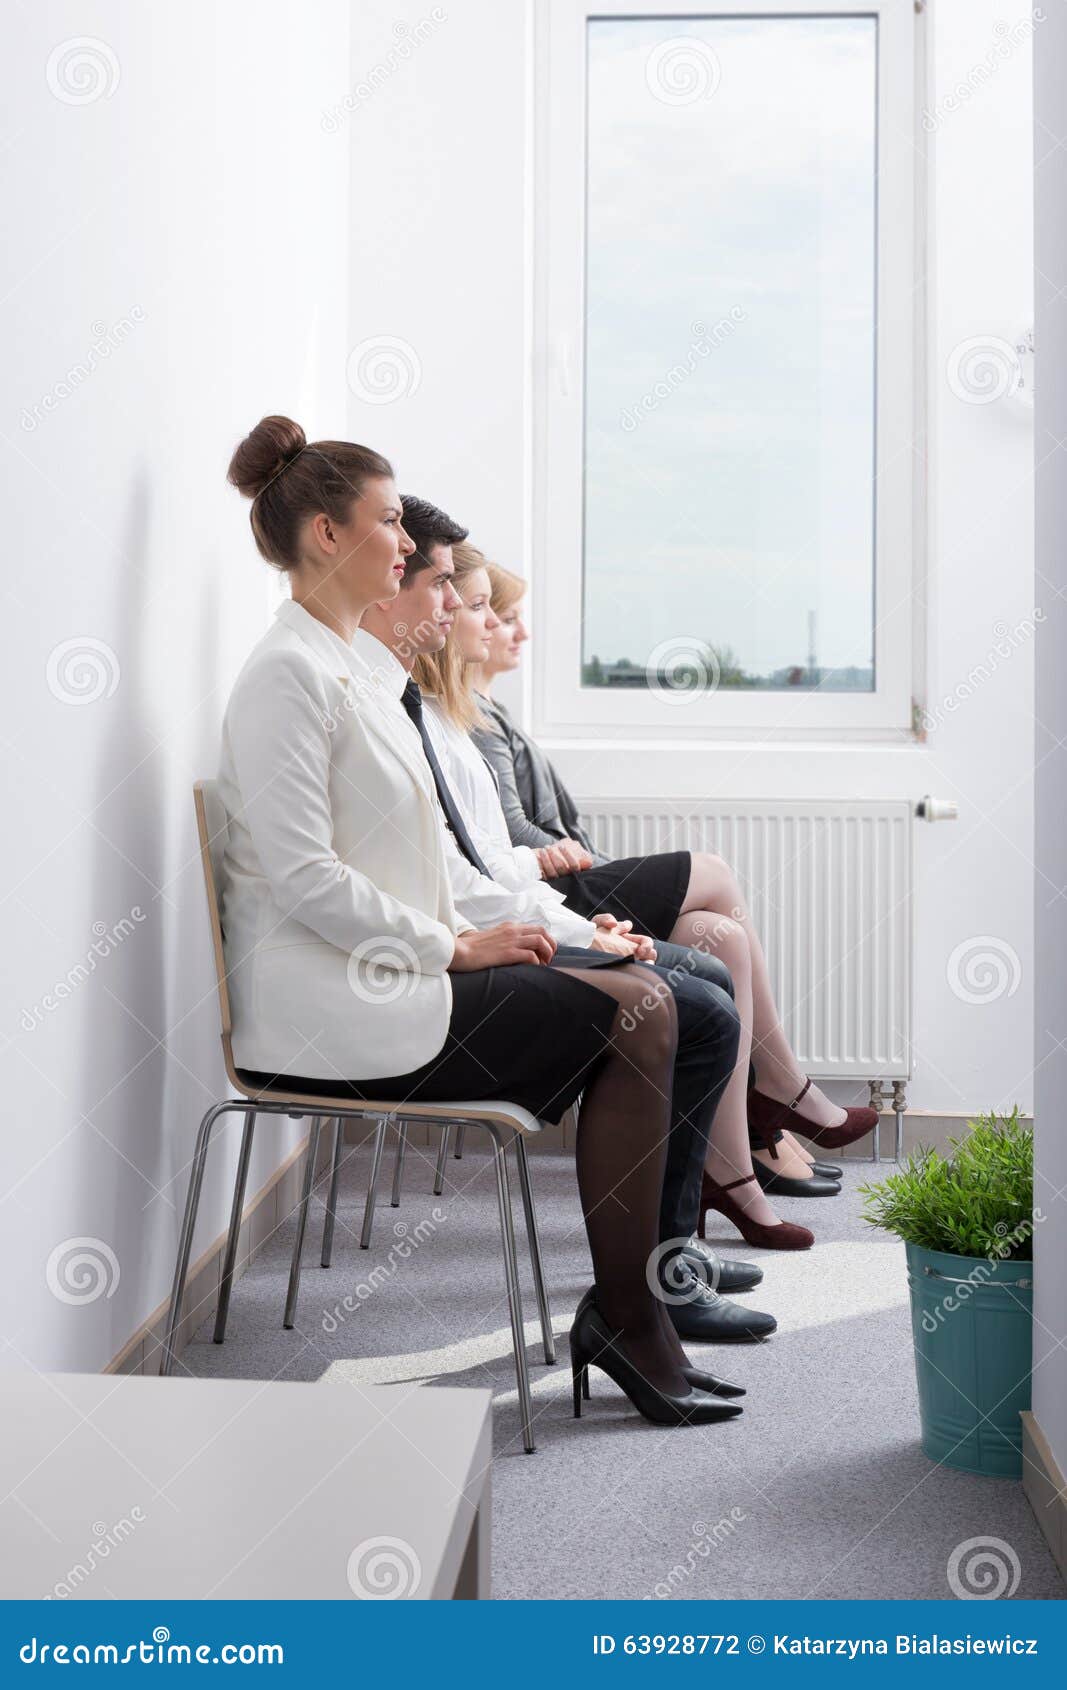 Waiting for an answer after job interview